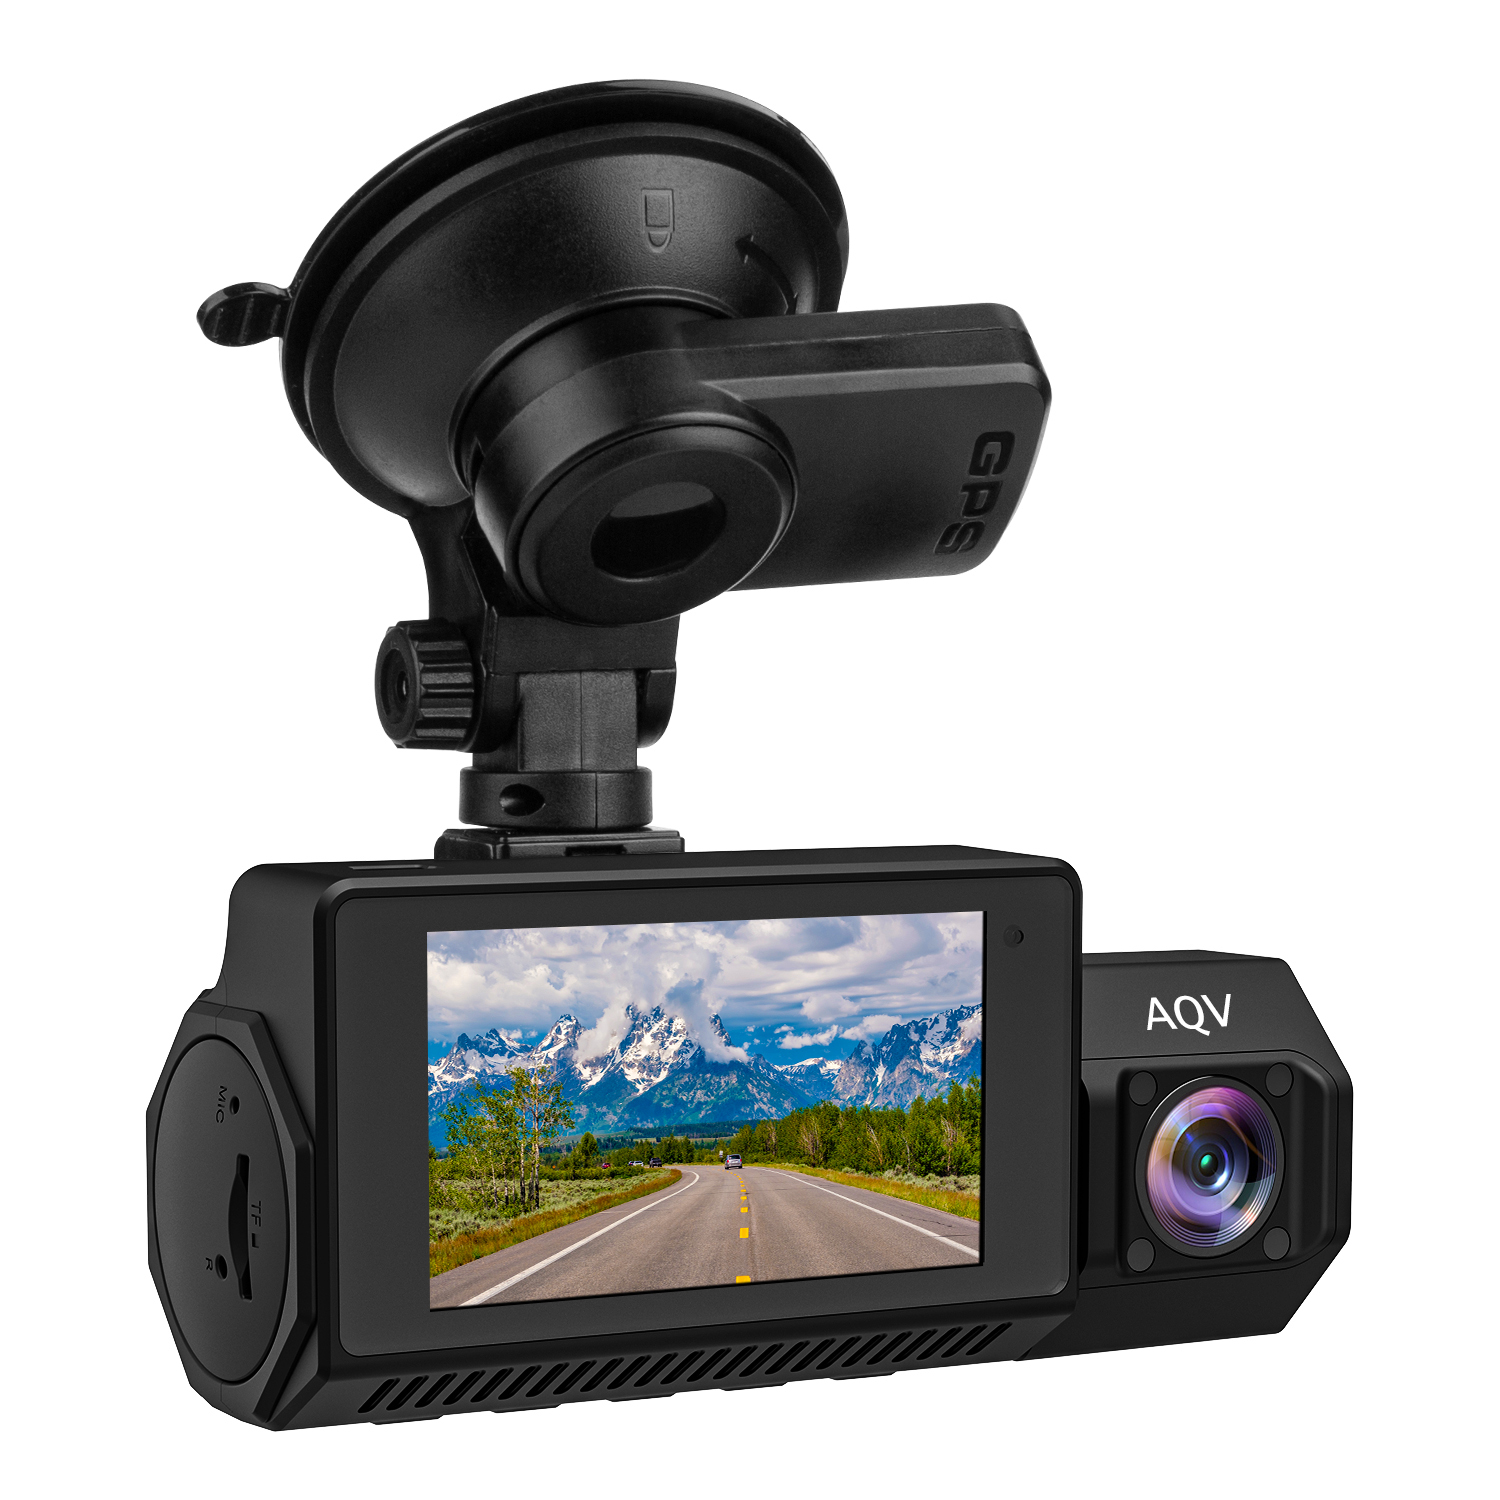 AQV 4K Dash Cam,Dual Dash Cam Built-in GPS,4K+1080P Front and Inside,Car Camera with 32GB Card,Parking Mode, Night Vision, WDR,G-Sensor, Motion Detector,Loop Recording